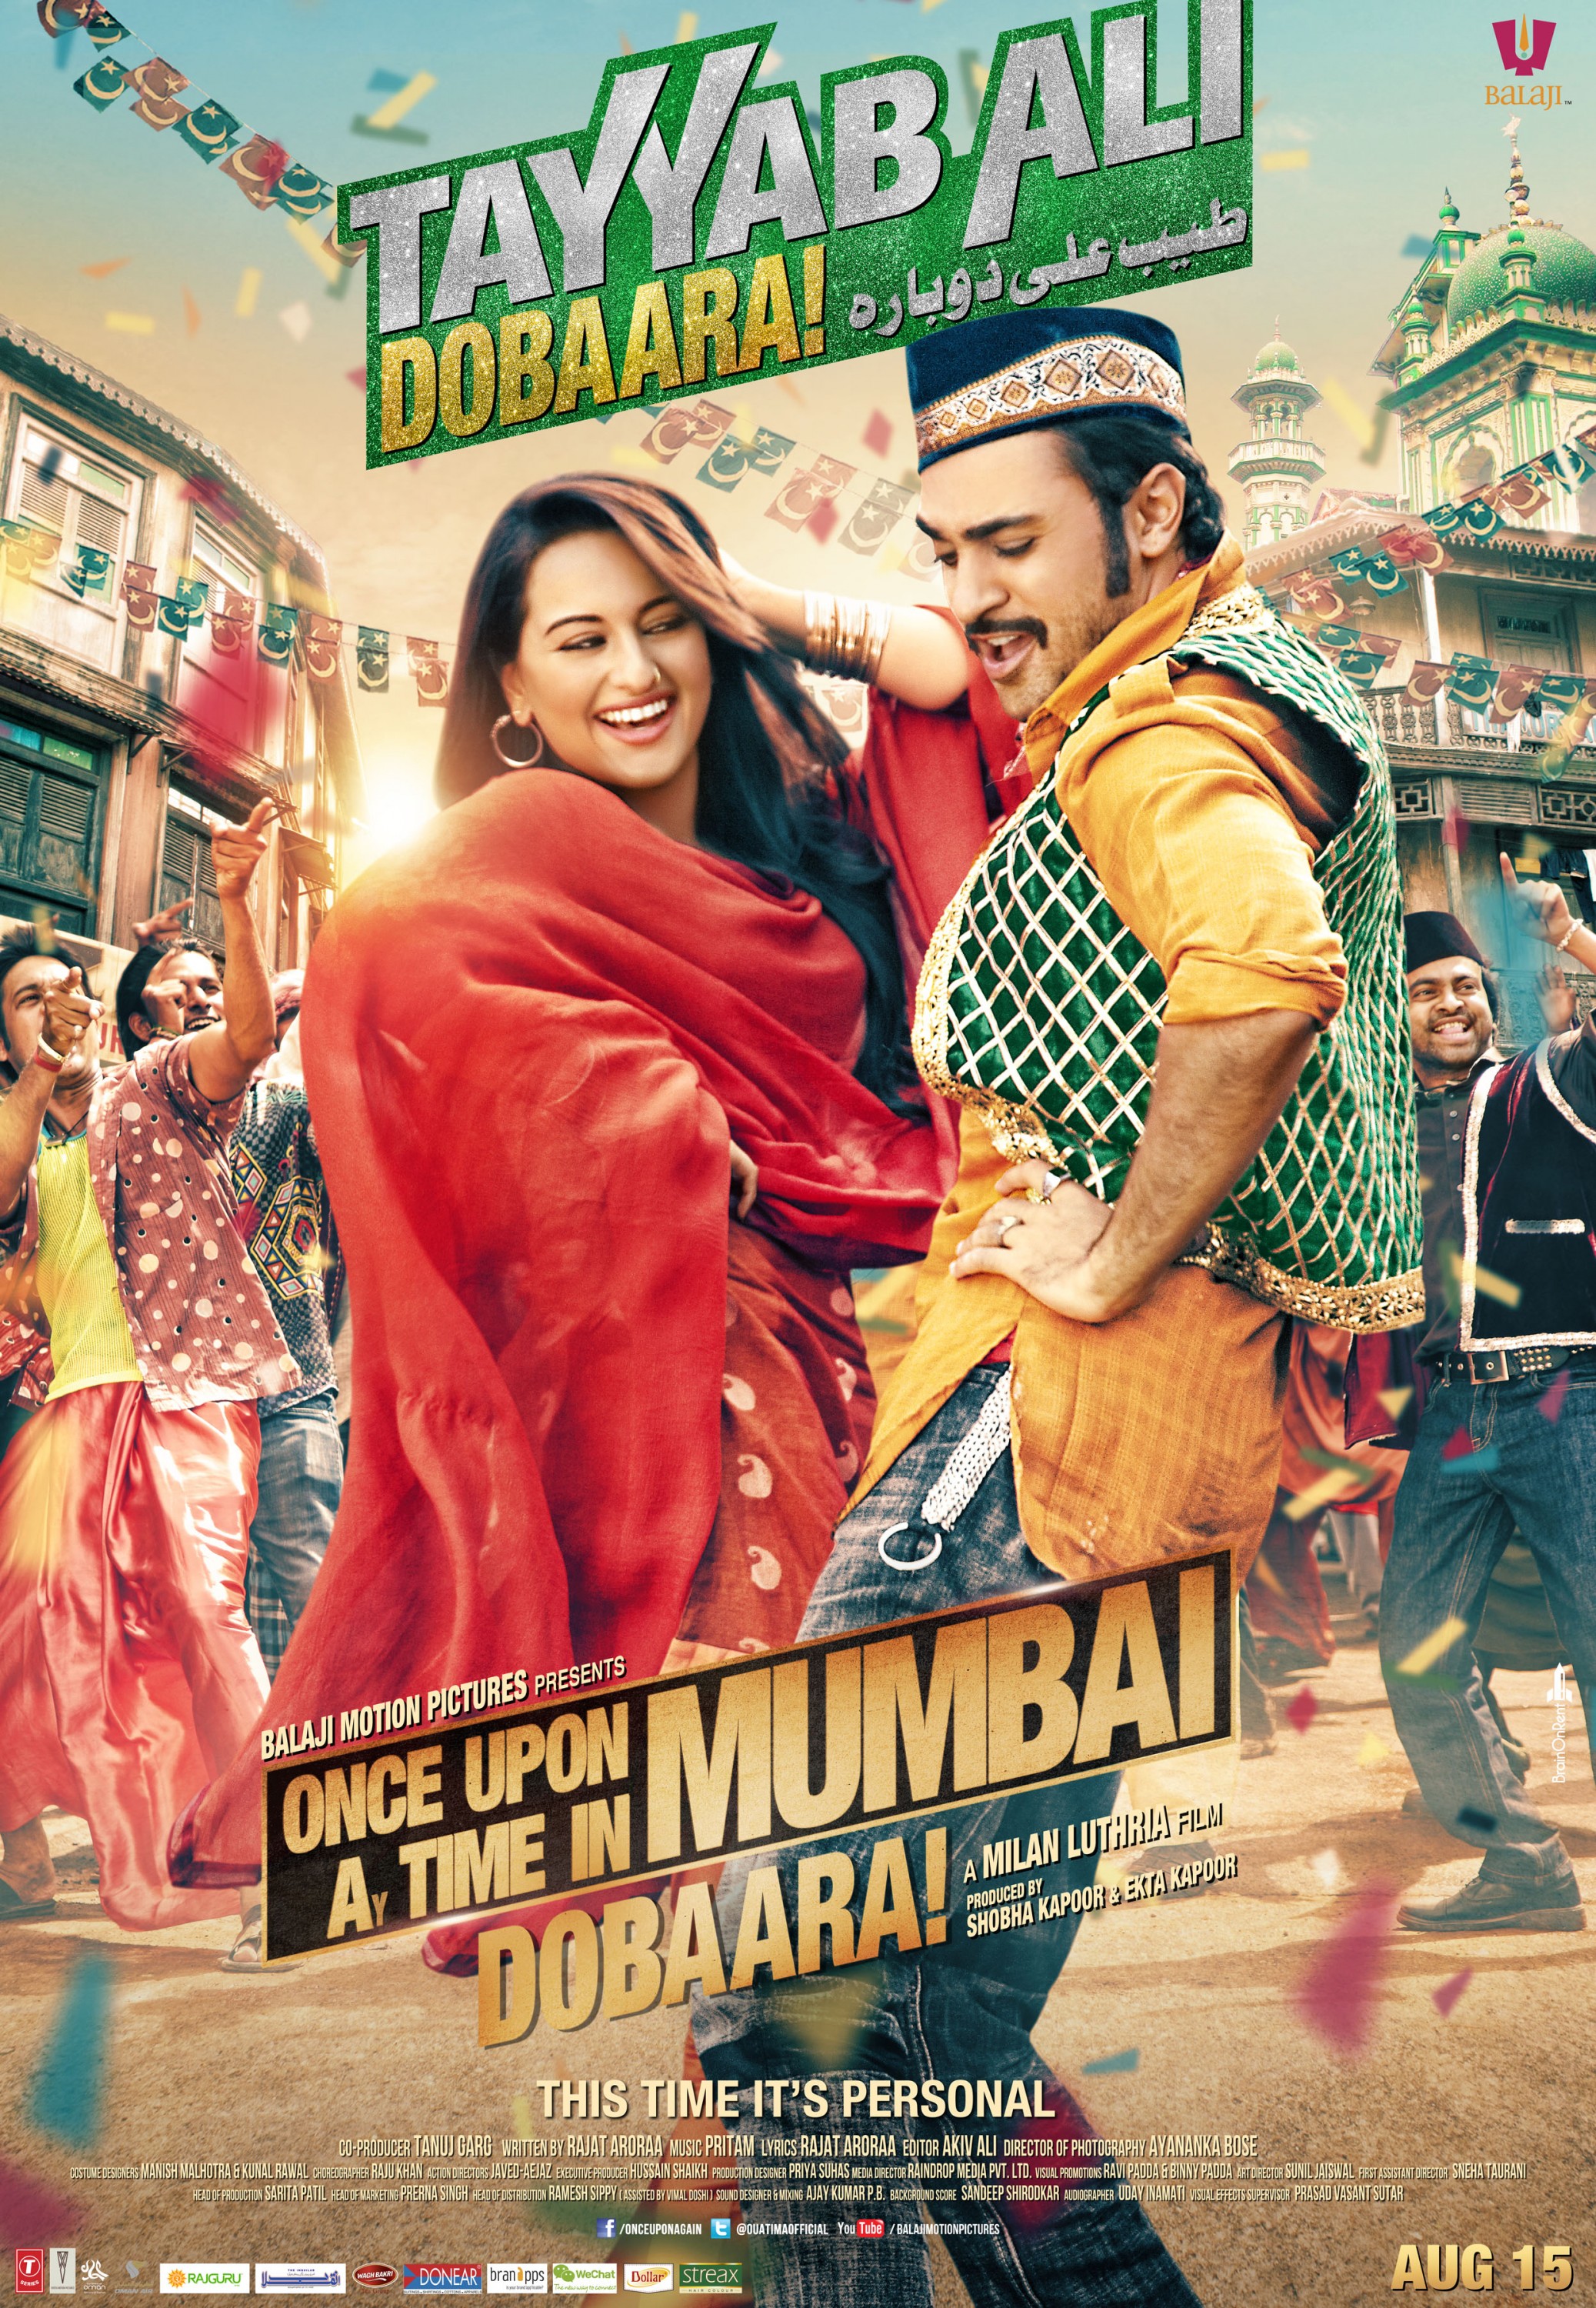 Mega Sized Movie Poster Image for Once Upon a Time in Mumbai Dobaara! (#11 of 11)